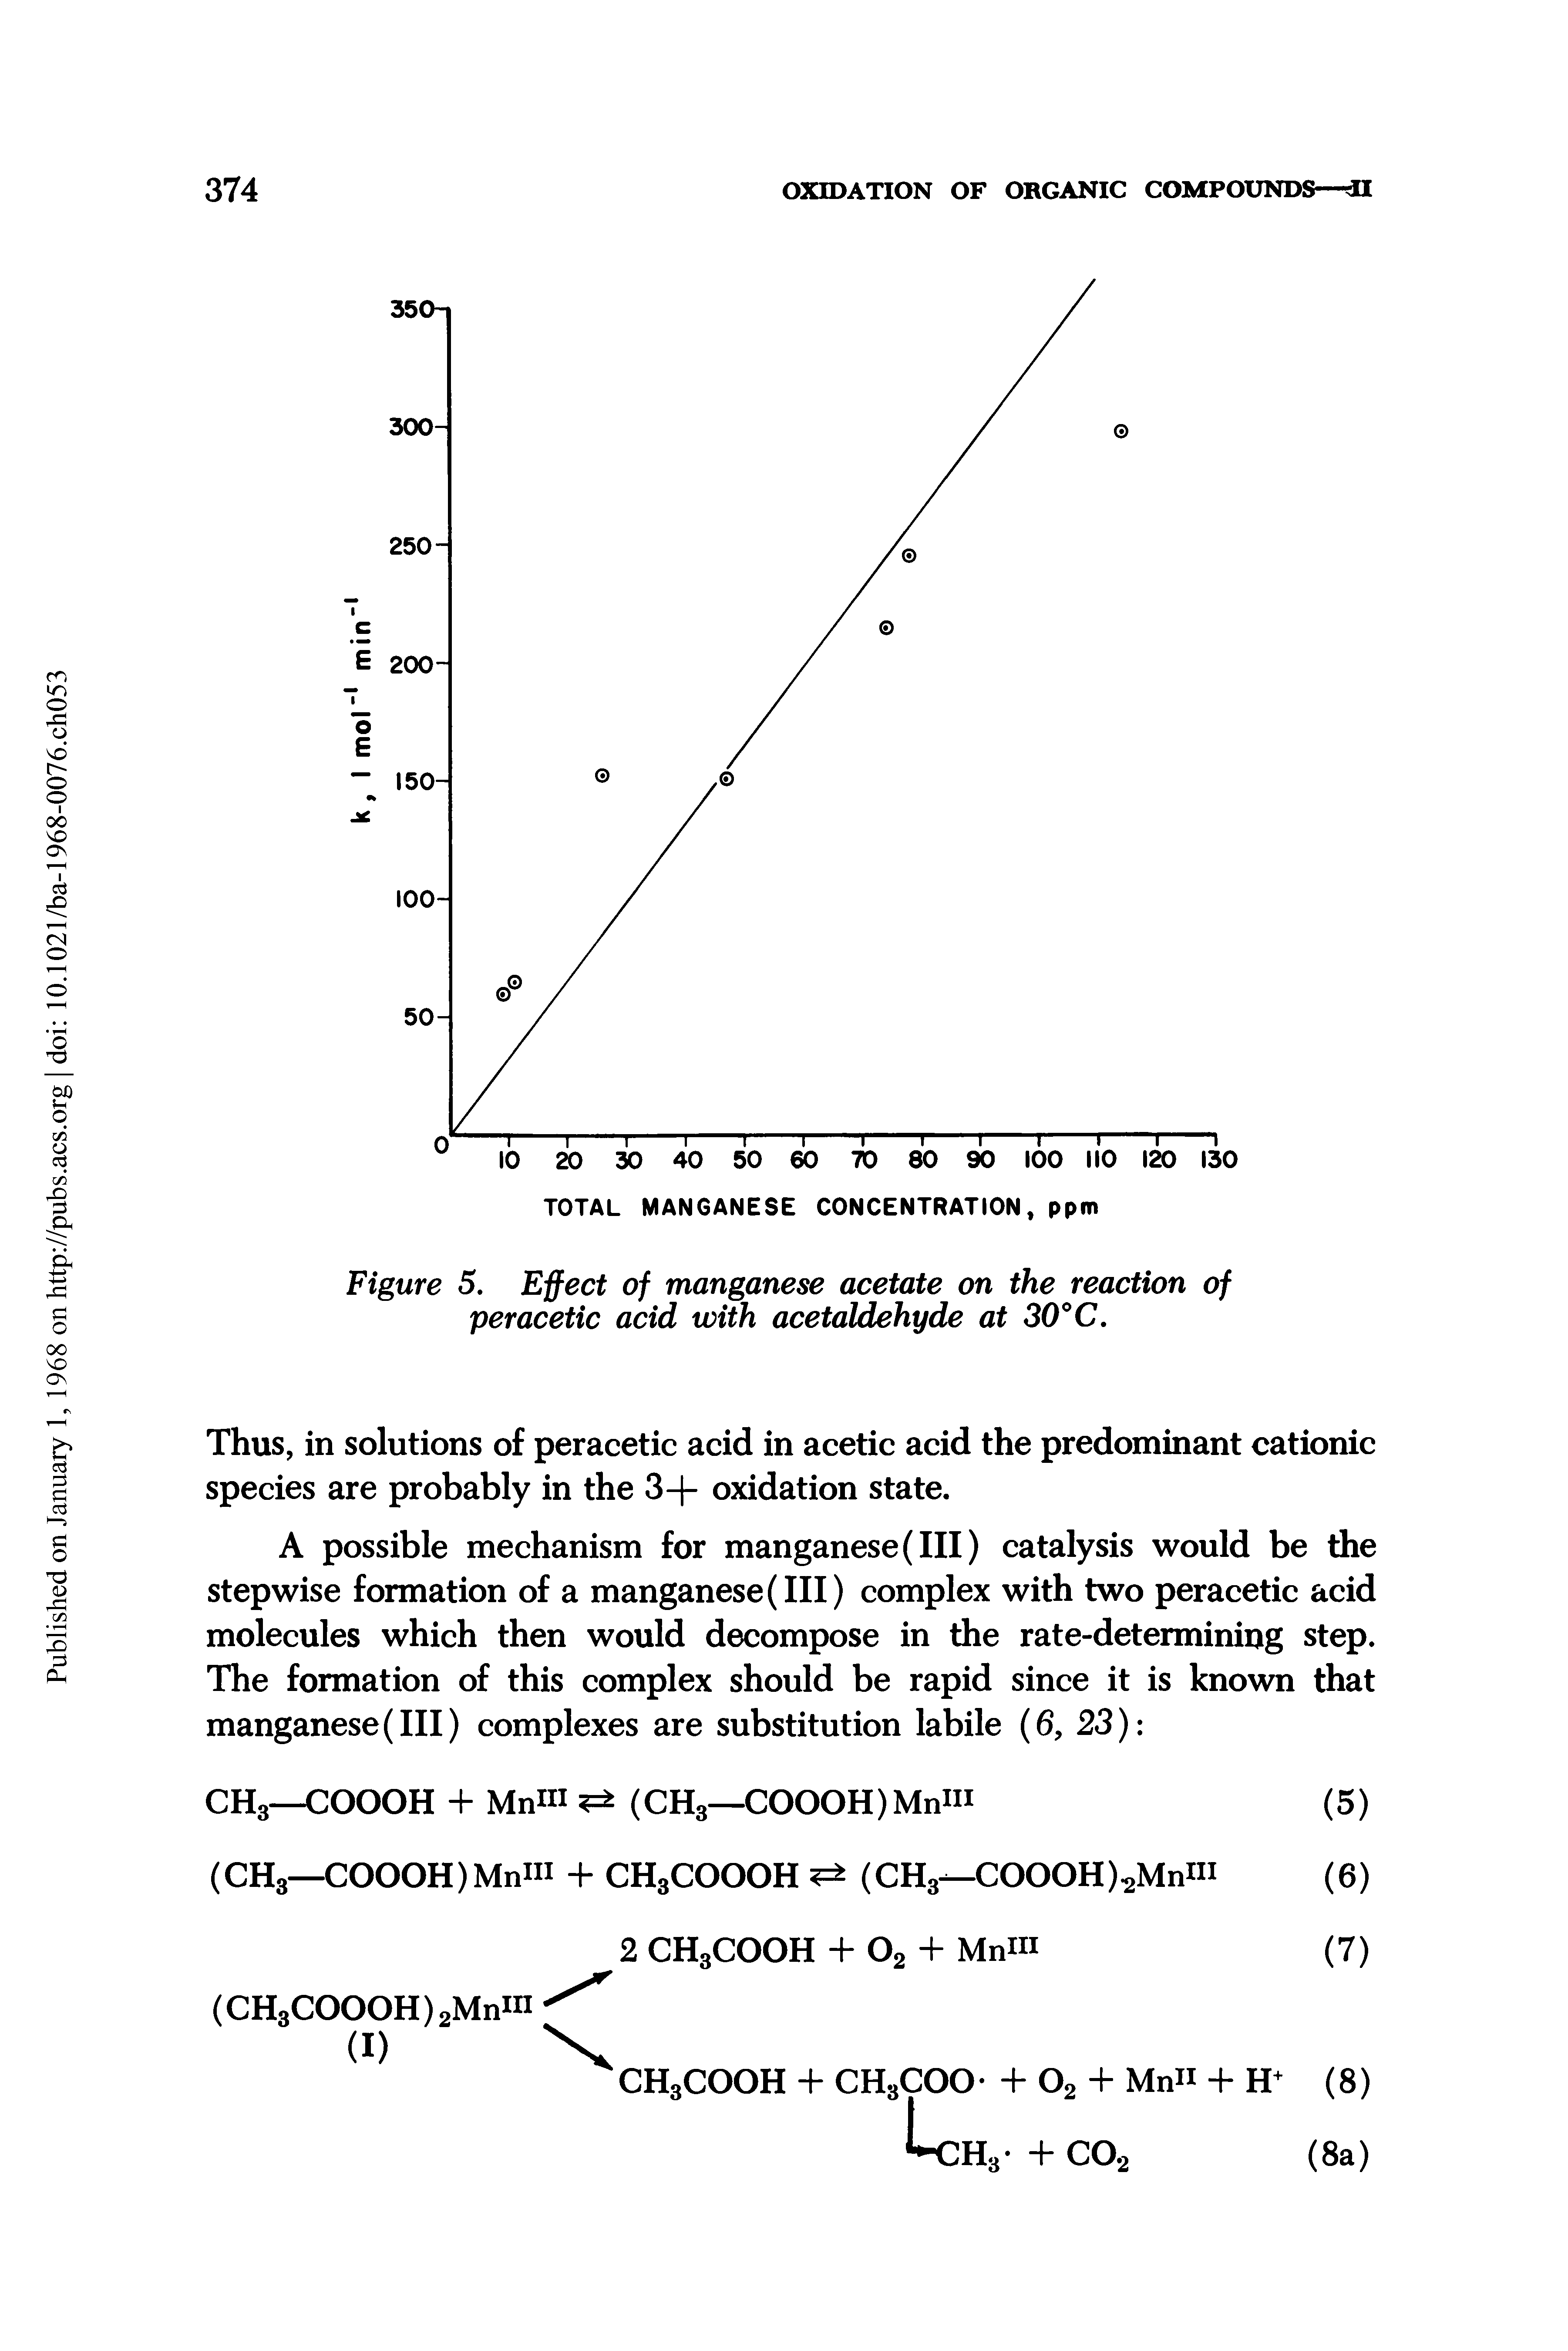 Figure 5. Effect of manganese acetate on the reaction of peracetic acid with acetaldehyde at 30°C.